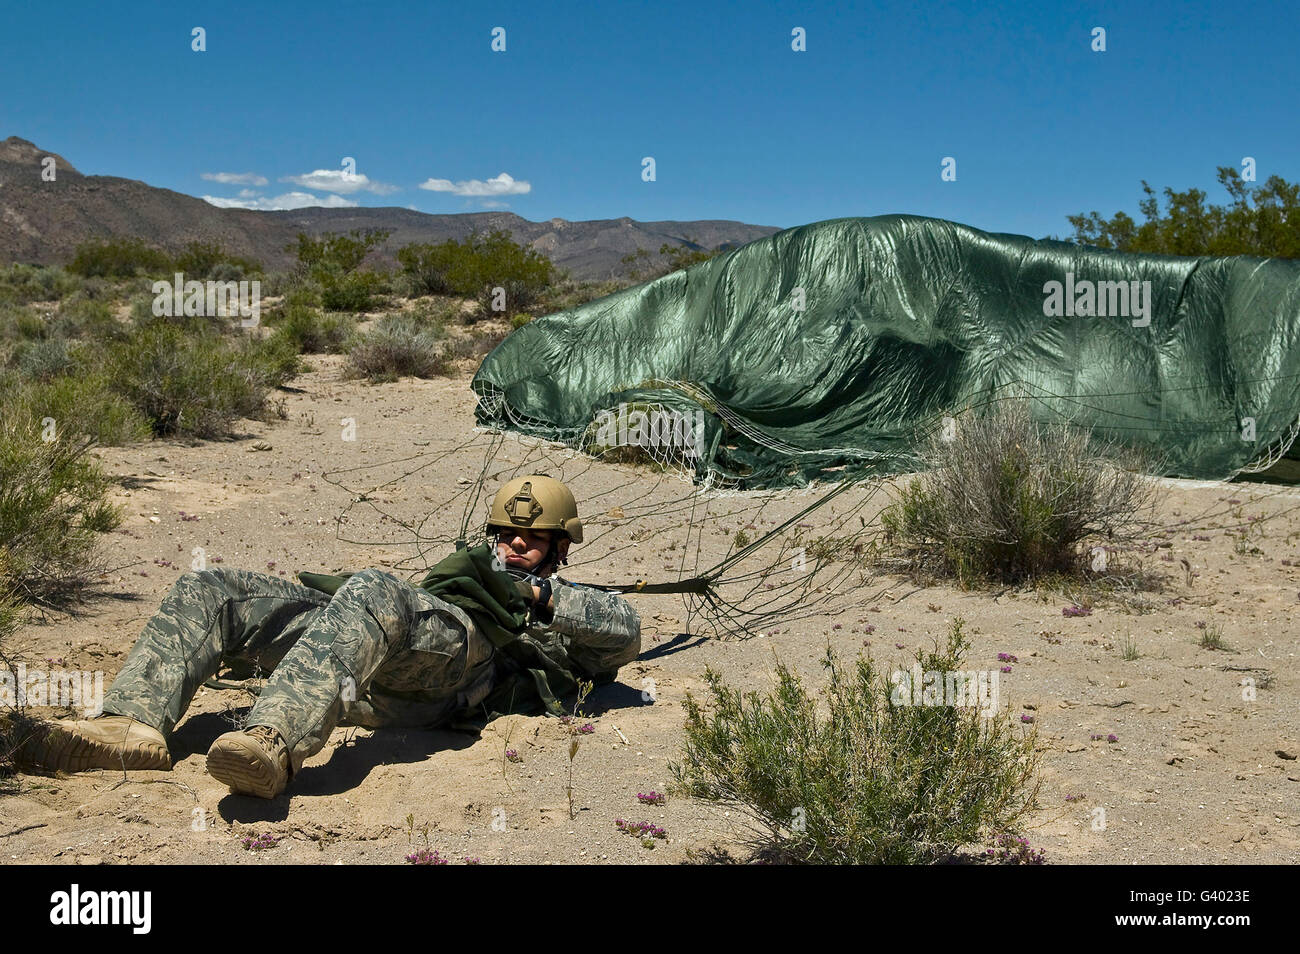 A paratrooper recovers after landing from an air jump. Stock Photo